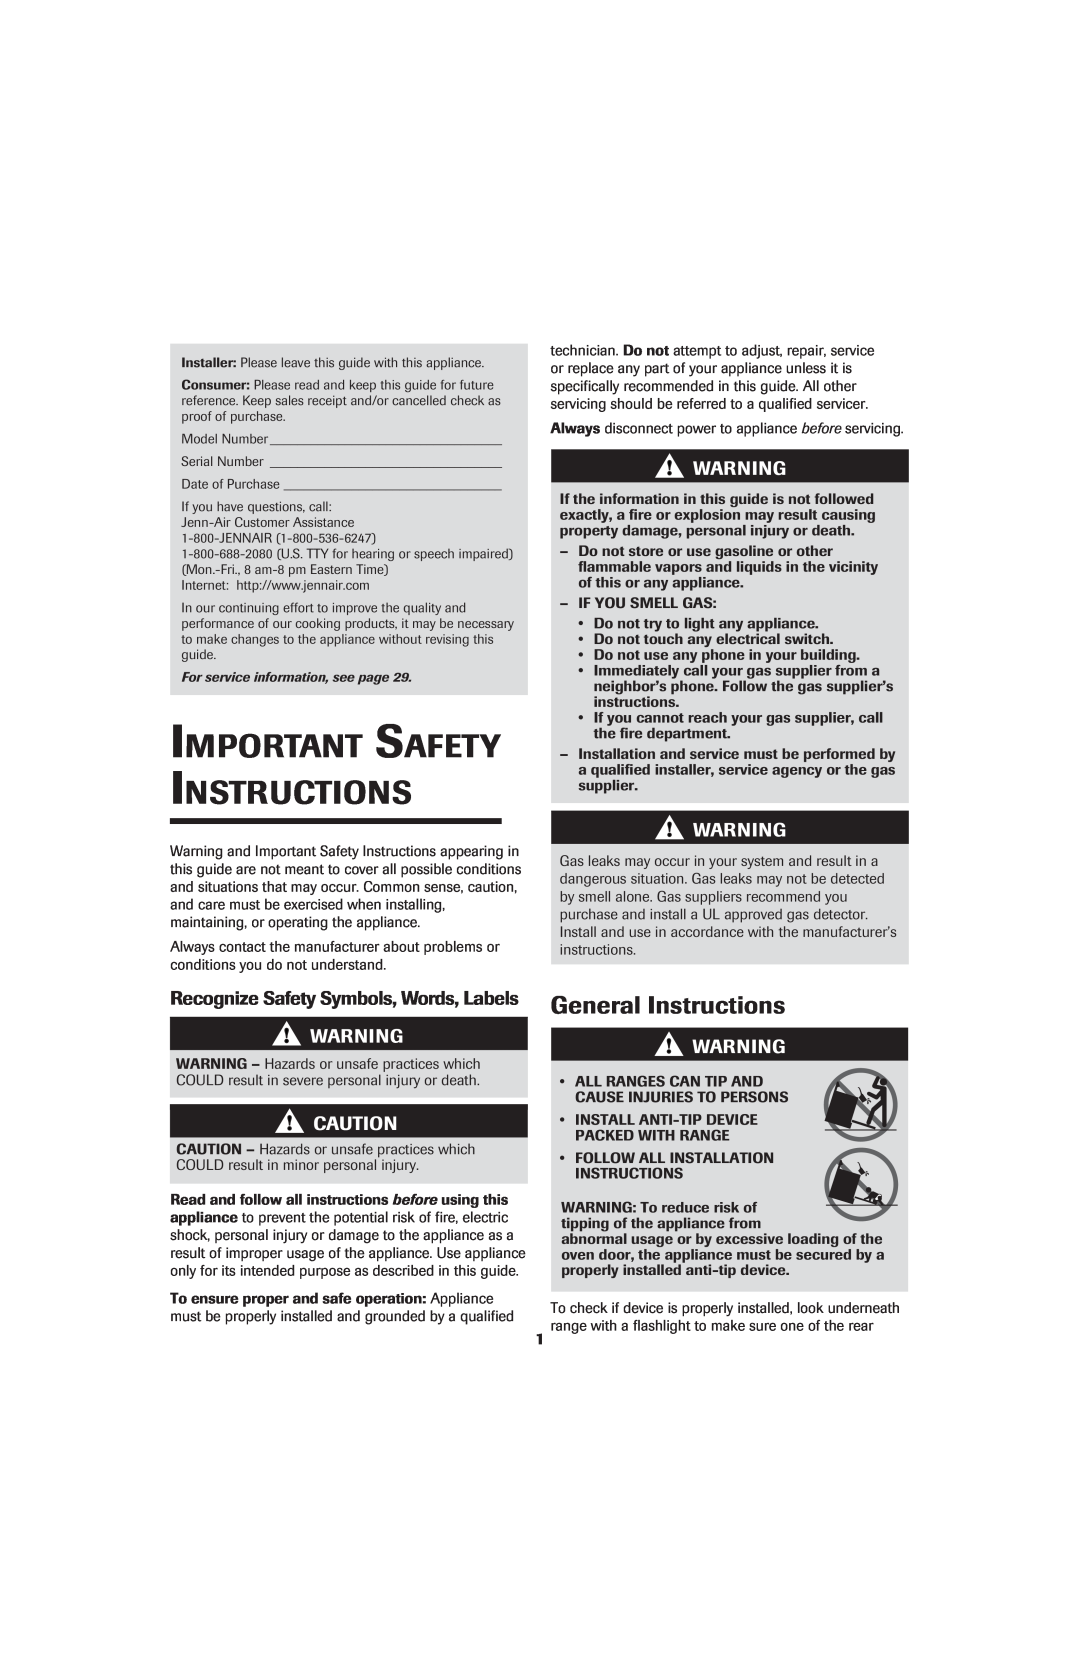 Jenn-Air 8113P714-60 General Instructions, Recognize Safety Symbols, Words, Labels, Important Safety Instructions 